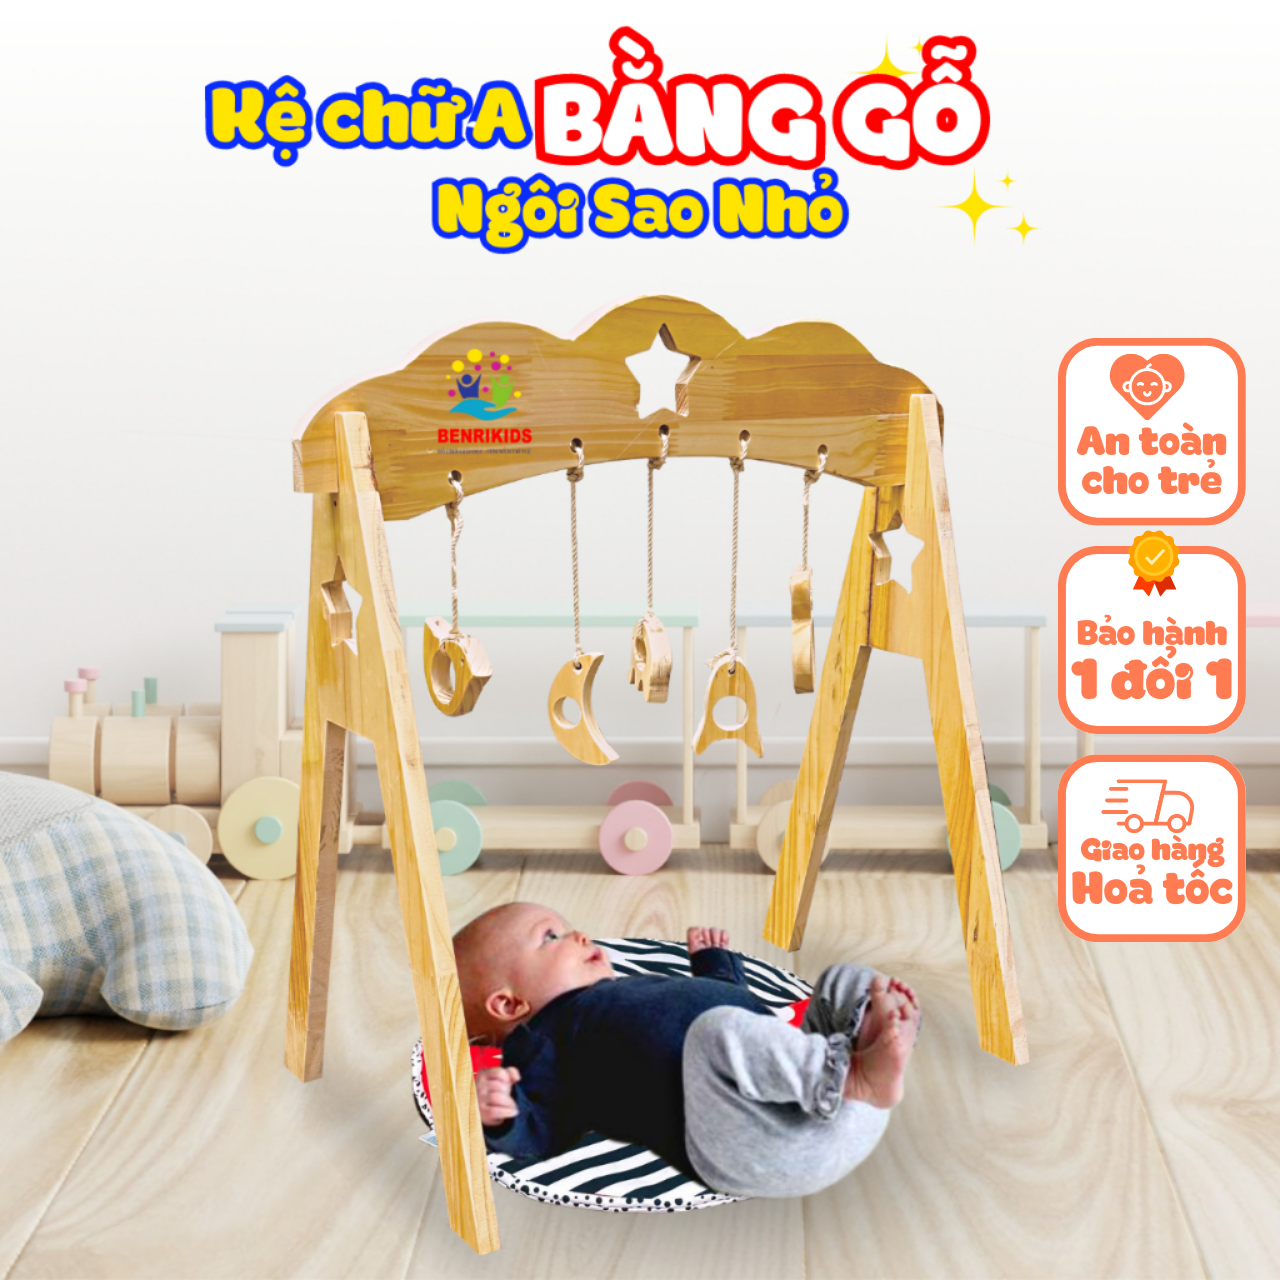 A-line wooden shelf baby rattles toy visual stimulation development and